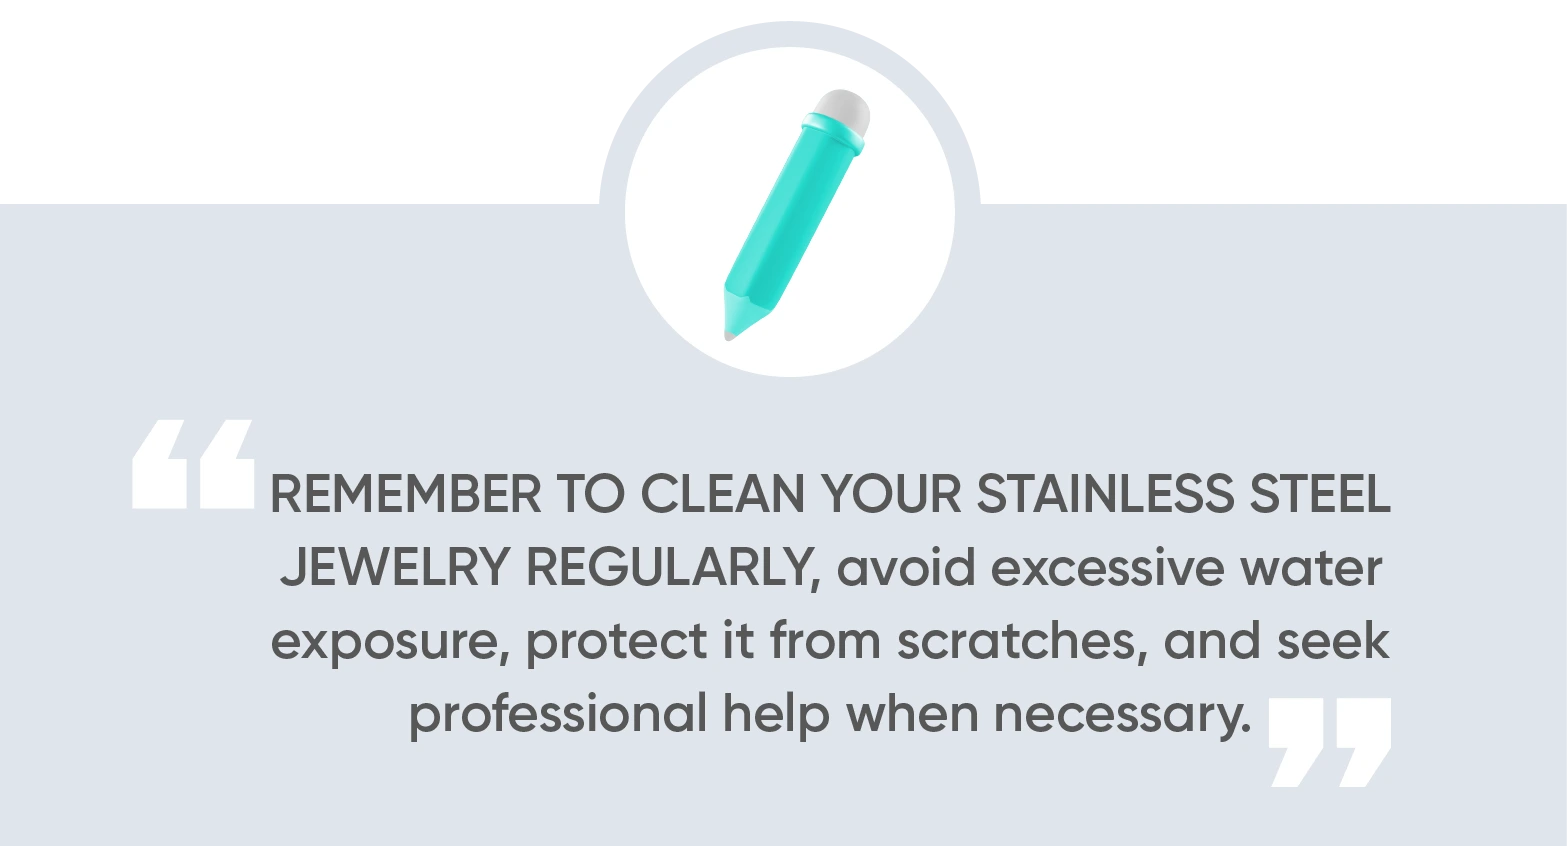 Comprehensive Guide to Cleaning and Storing Stainless Steel Jewelry